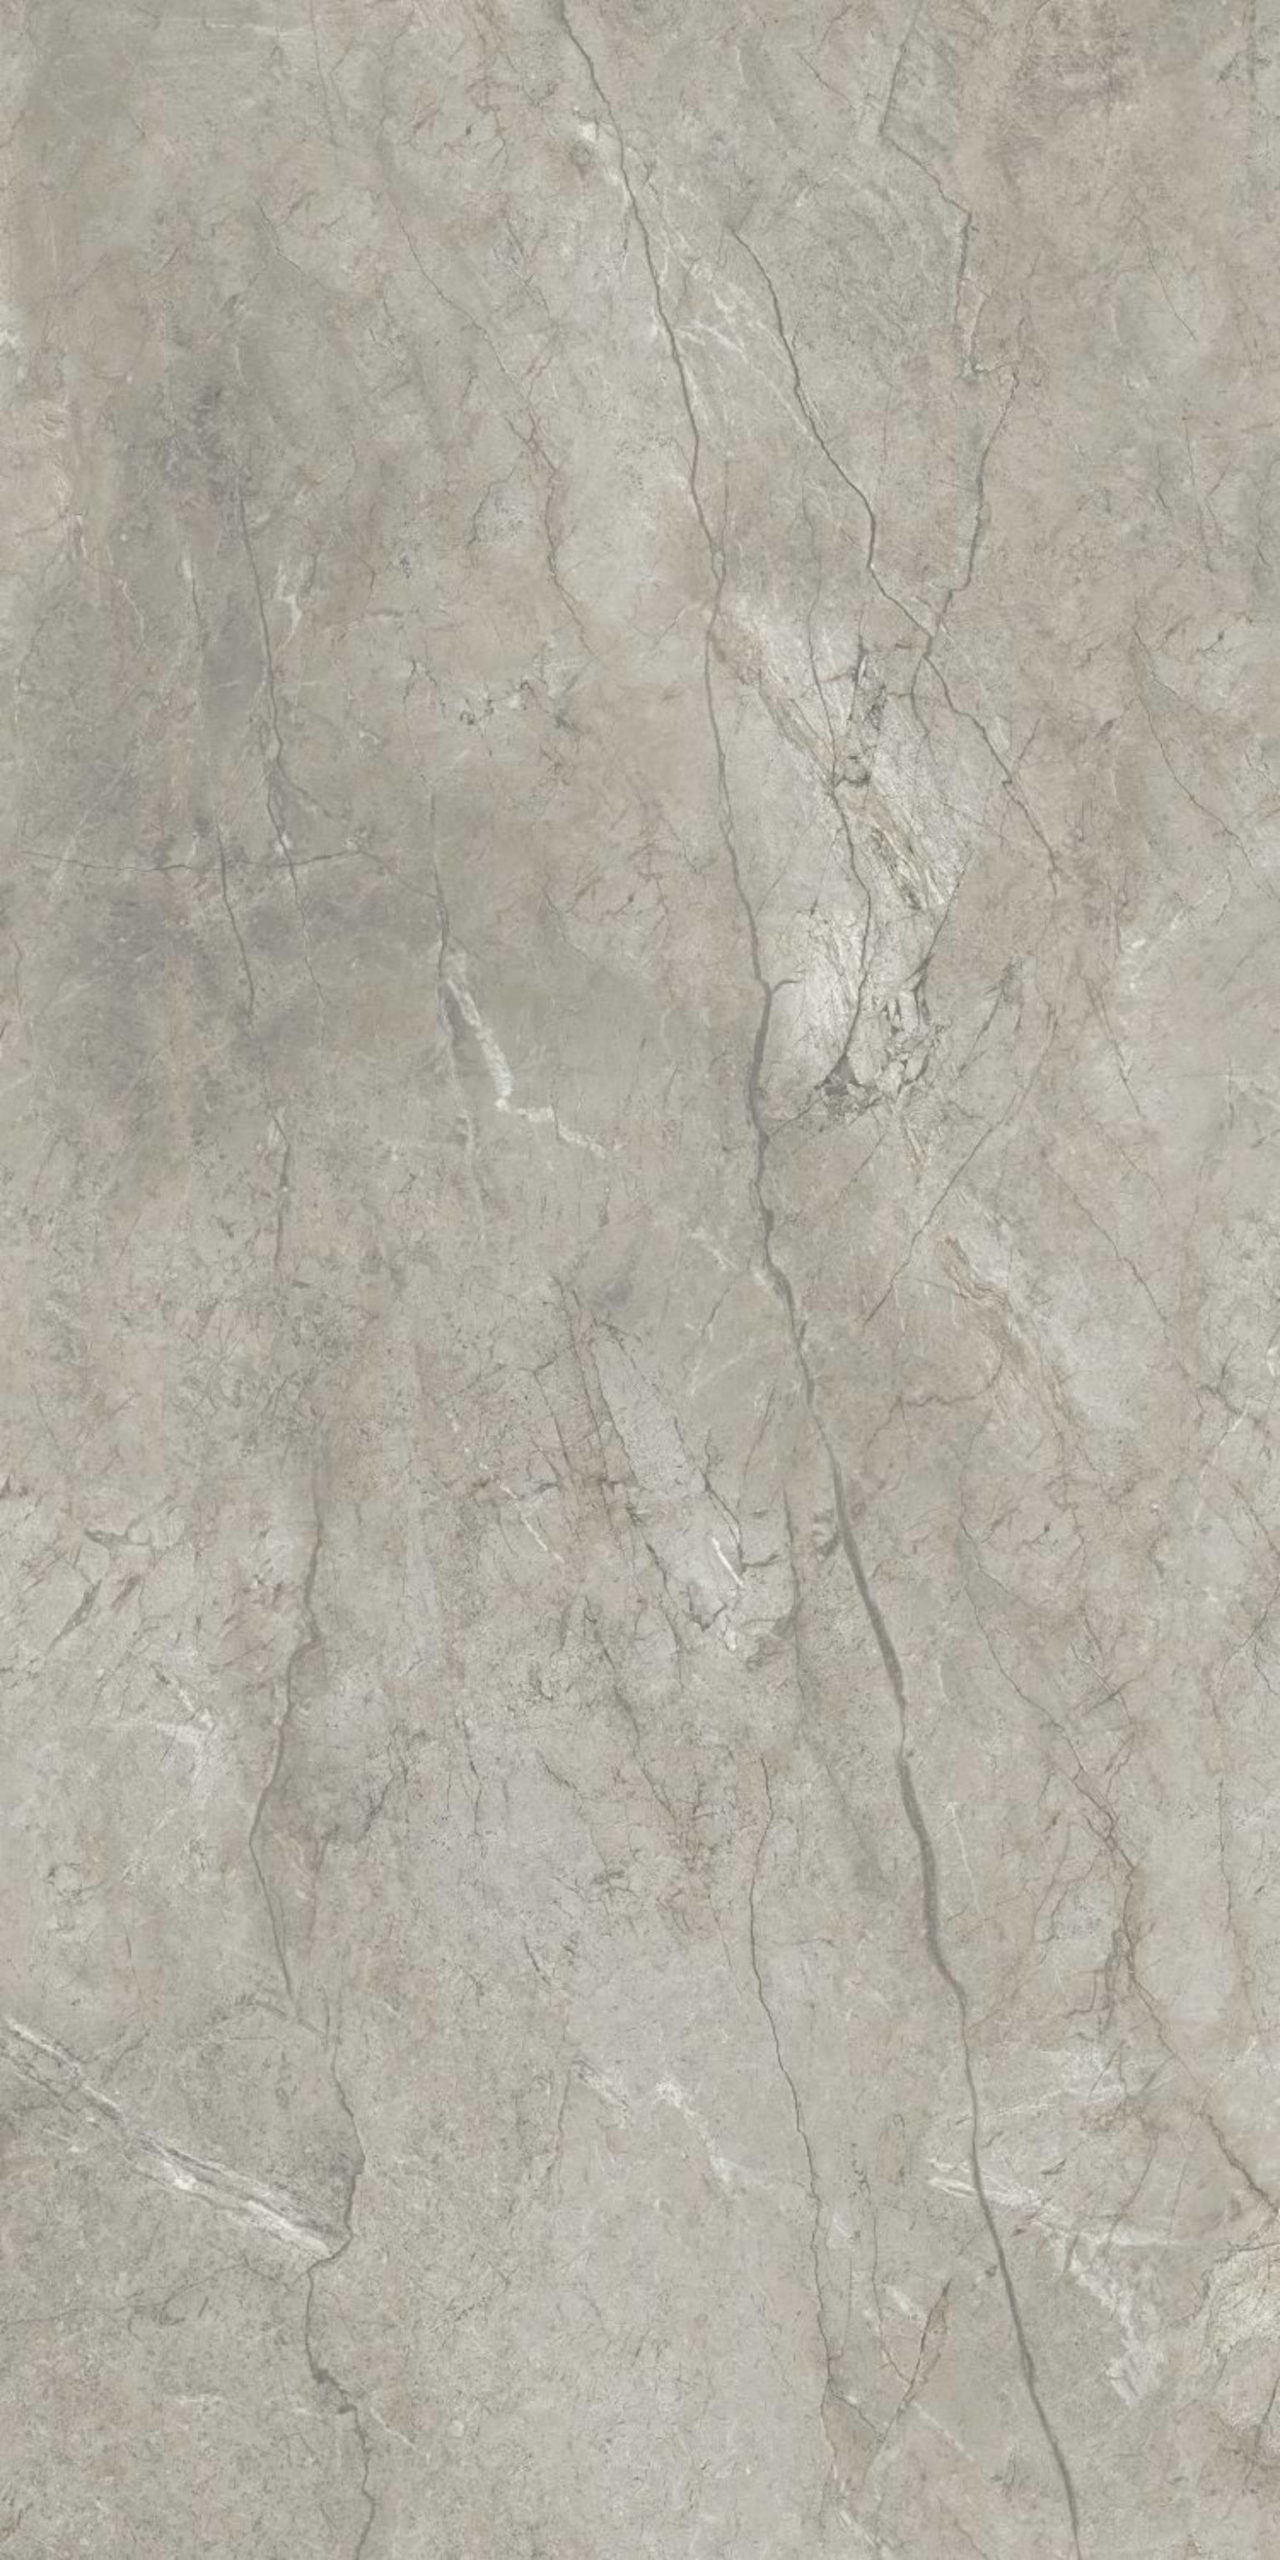 Prestige Imperiale Grey | Stones And More | Finest selection of Mosaics, Glass, Tile and Stone